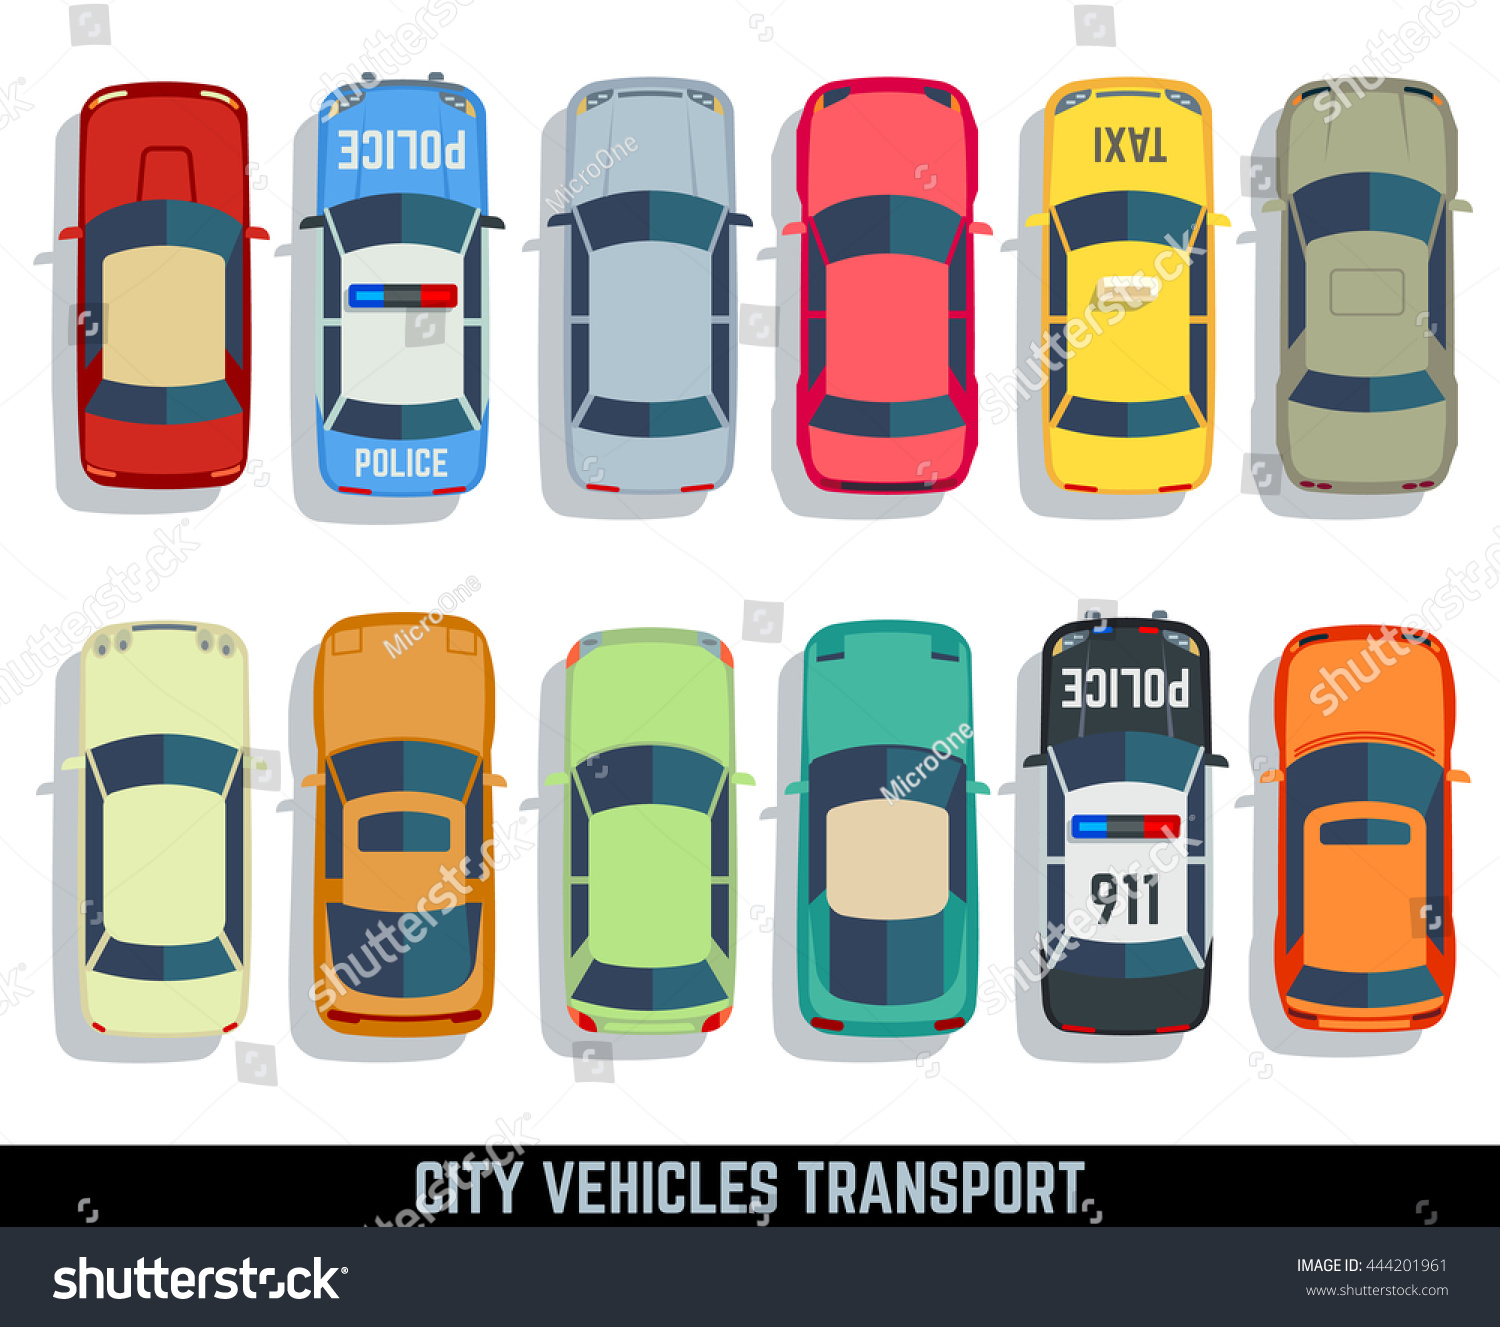 SVG of Cars top view vector flat city vehicle transport icons set. Automobile car for transportation, auto car icon illustration svg